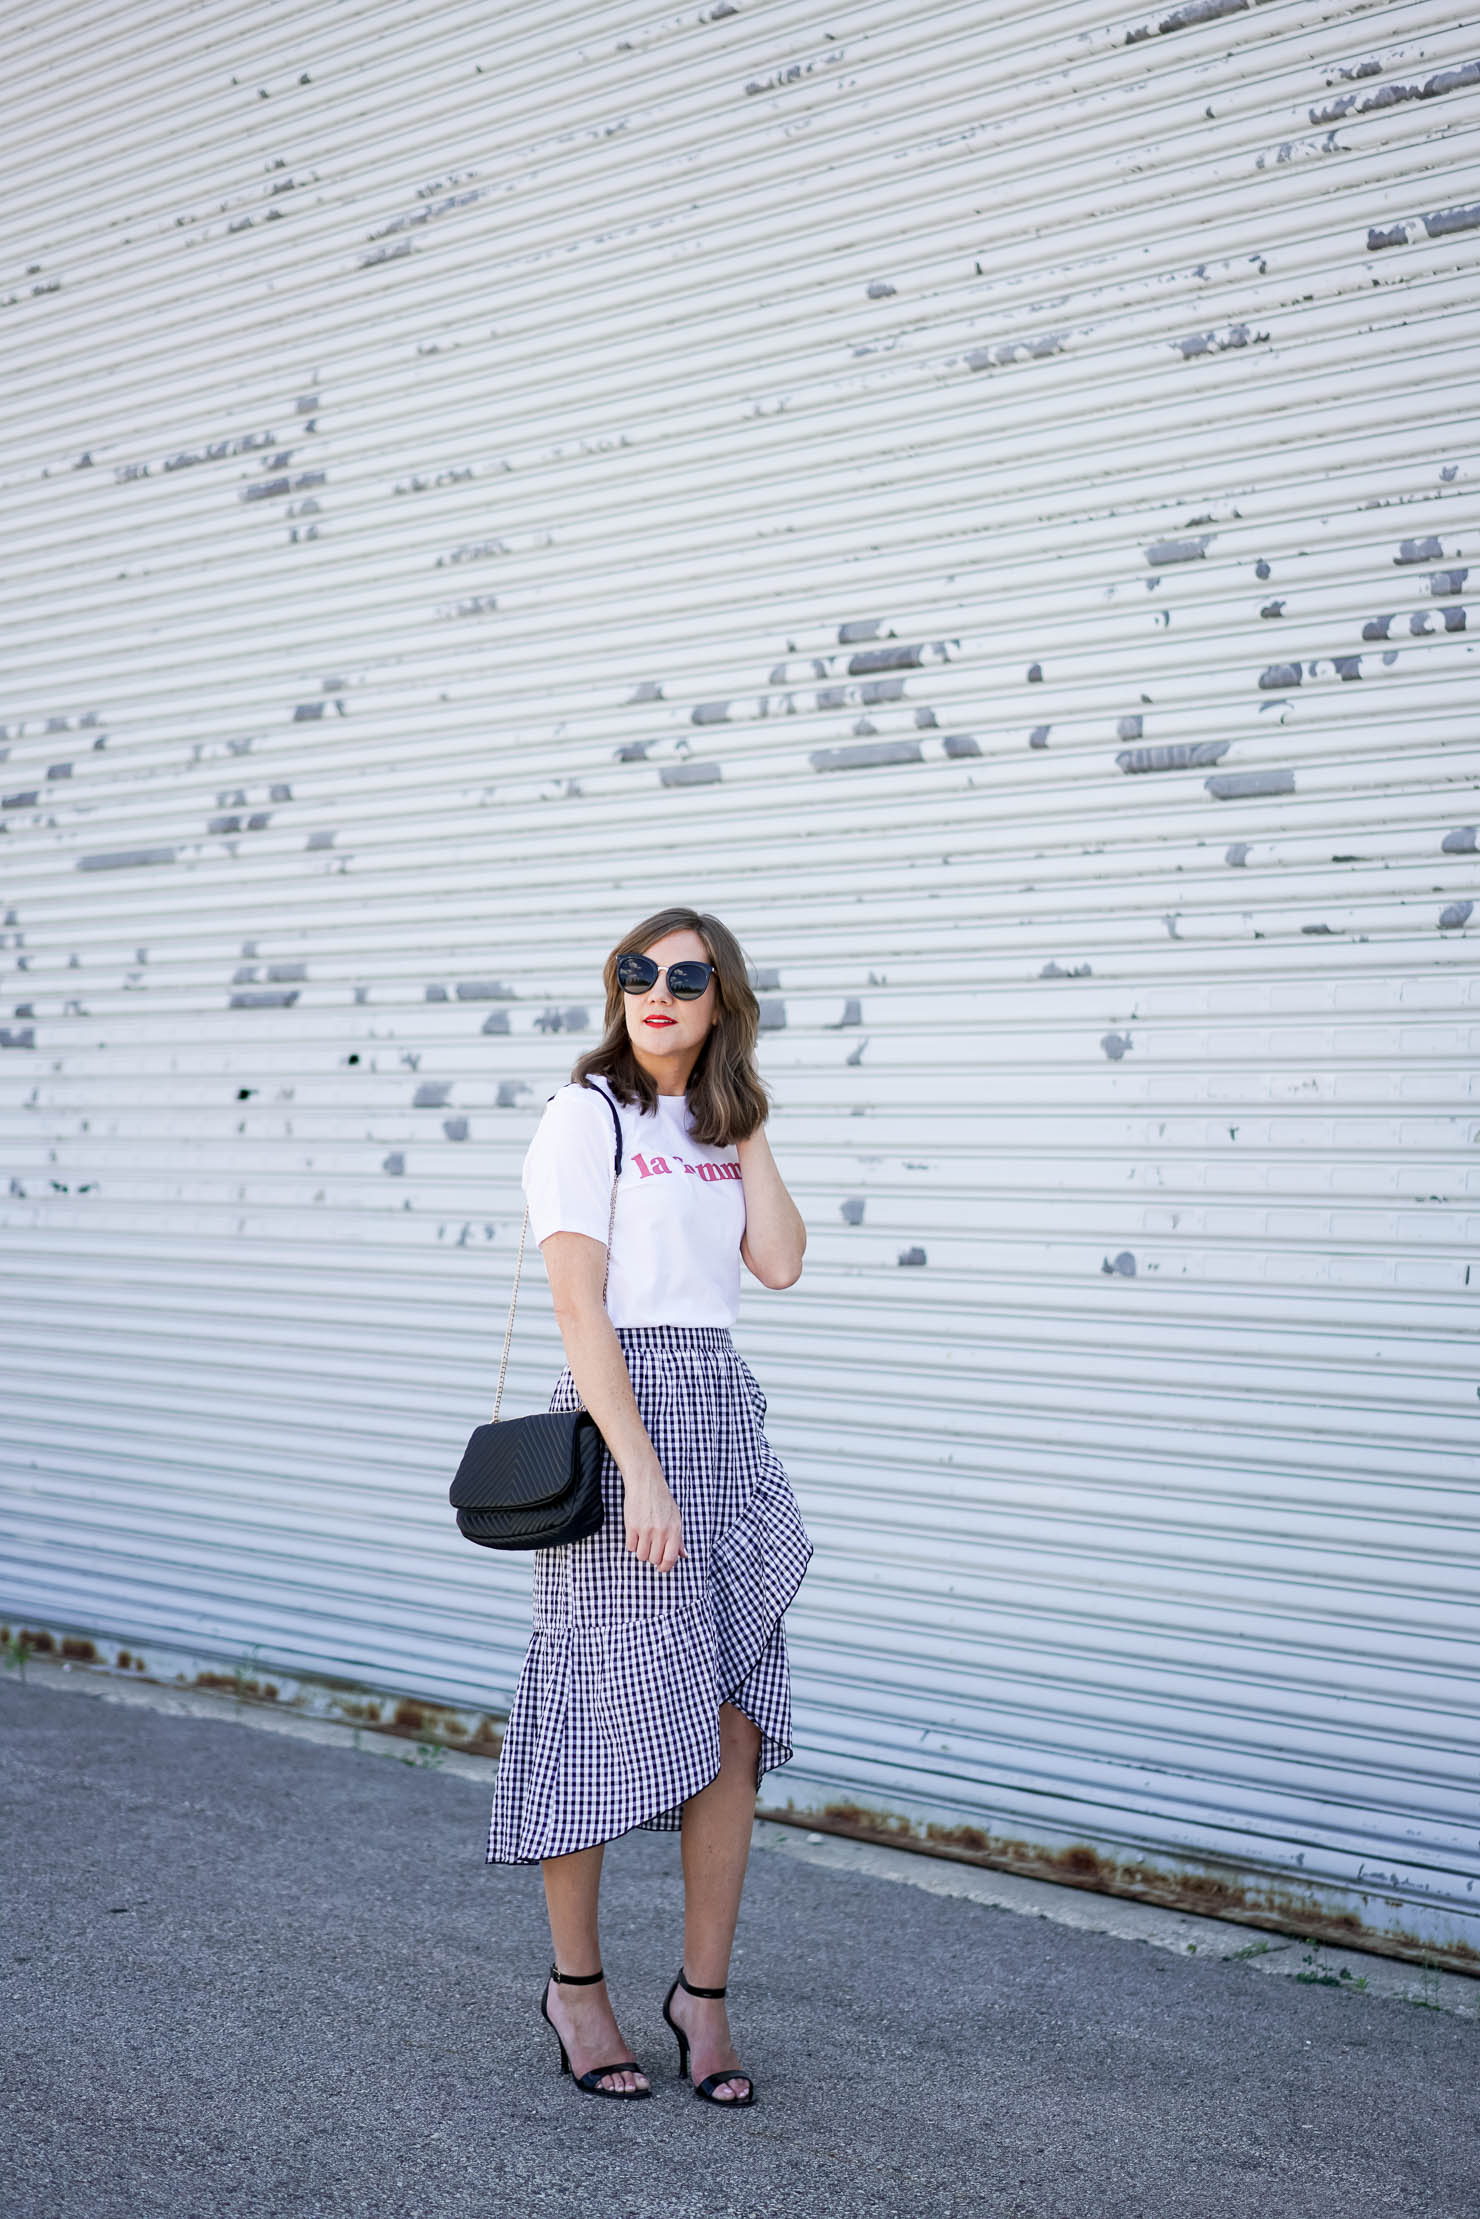 Parisian chic, gingham ruffled midi skirt, la femme tee easy, parisian inspired outfit, how to dress like a french girl, black and white gingham midi skirt